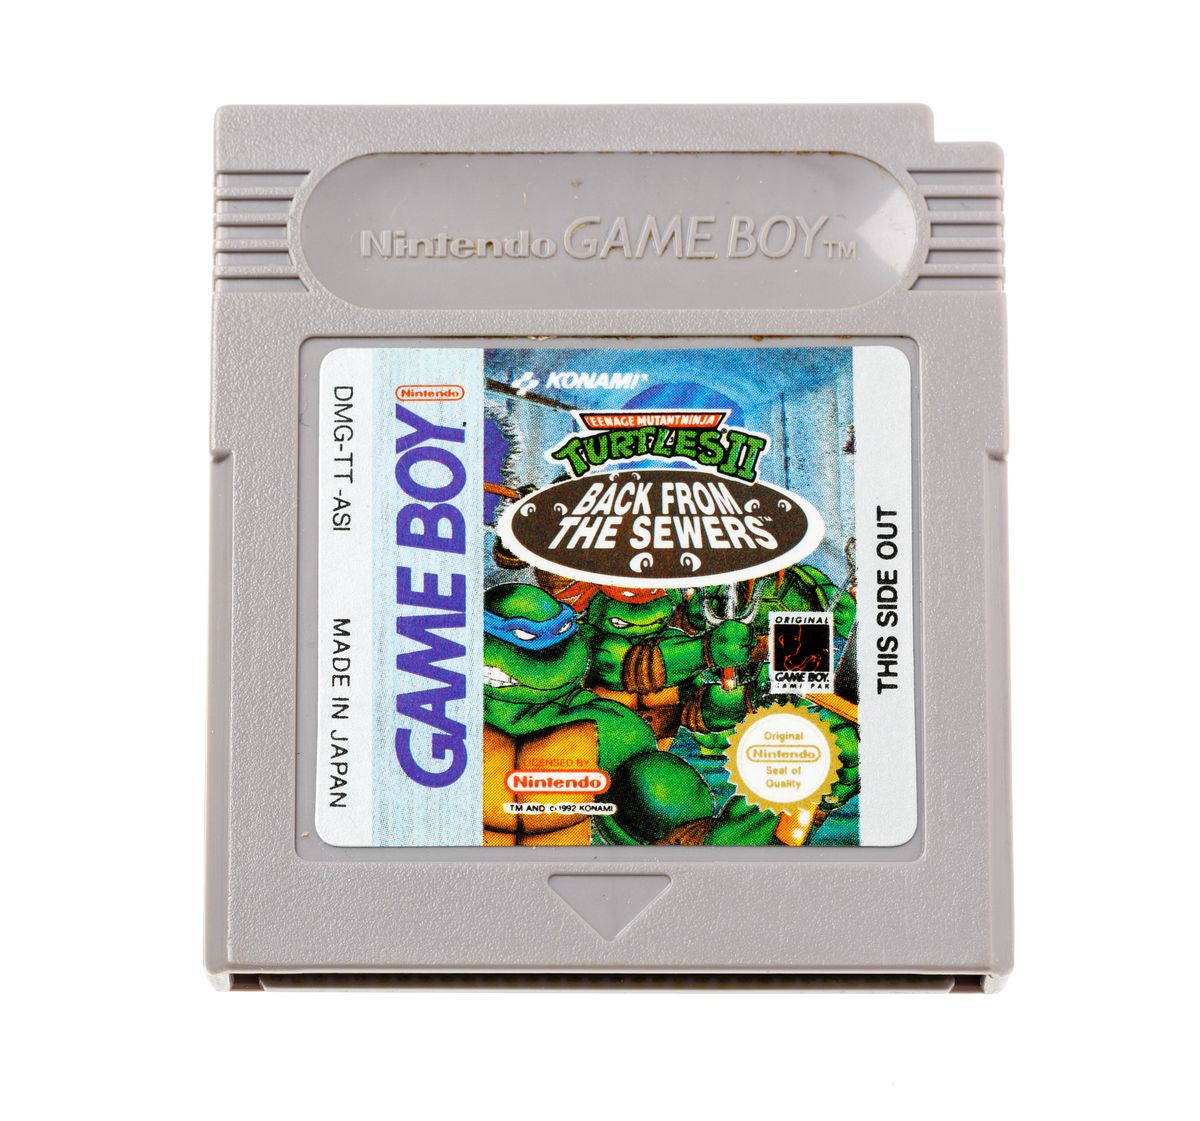 Turtles II Back from the Sewers | Gameboy Classic Games | RetroNintendoKopen.nl